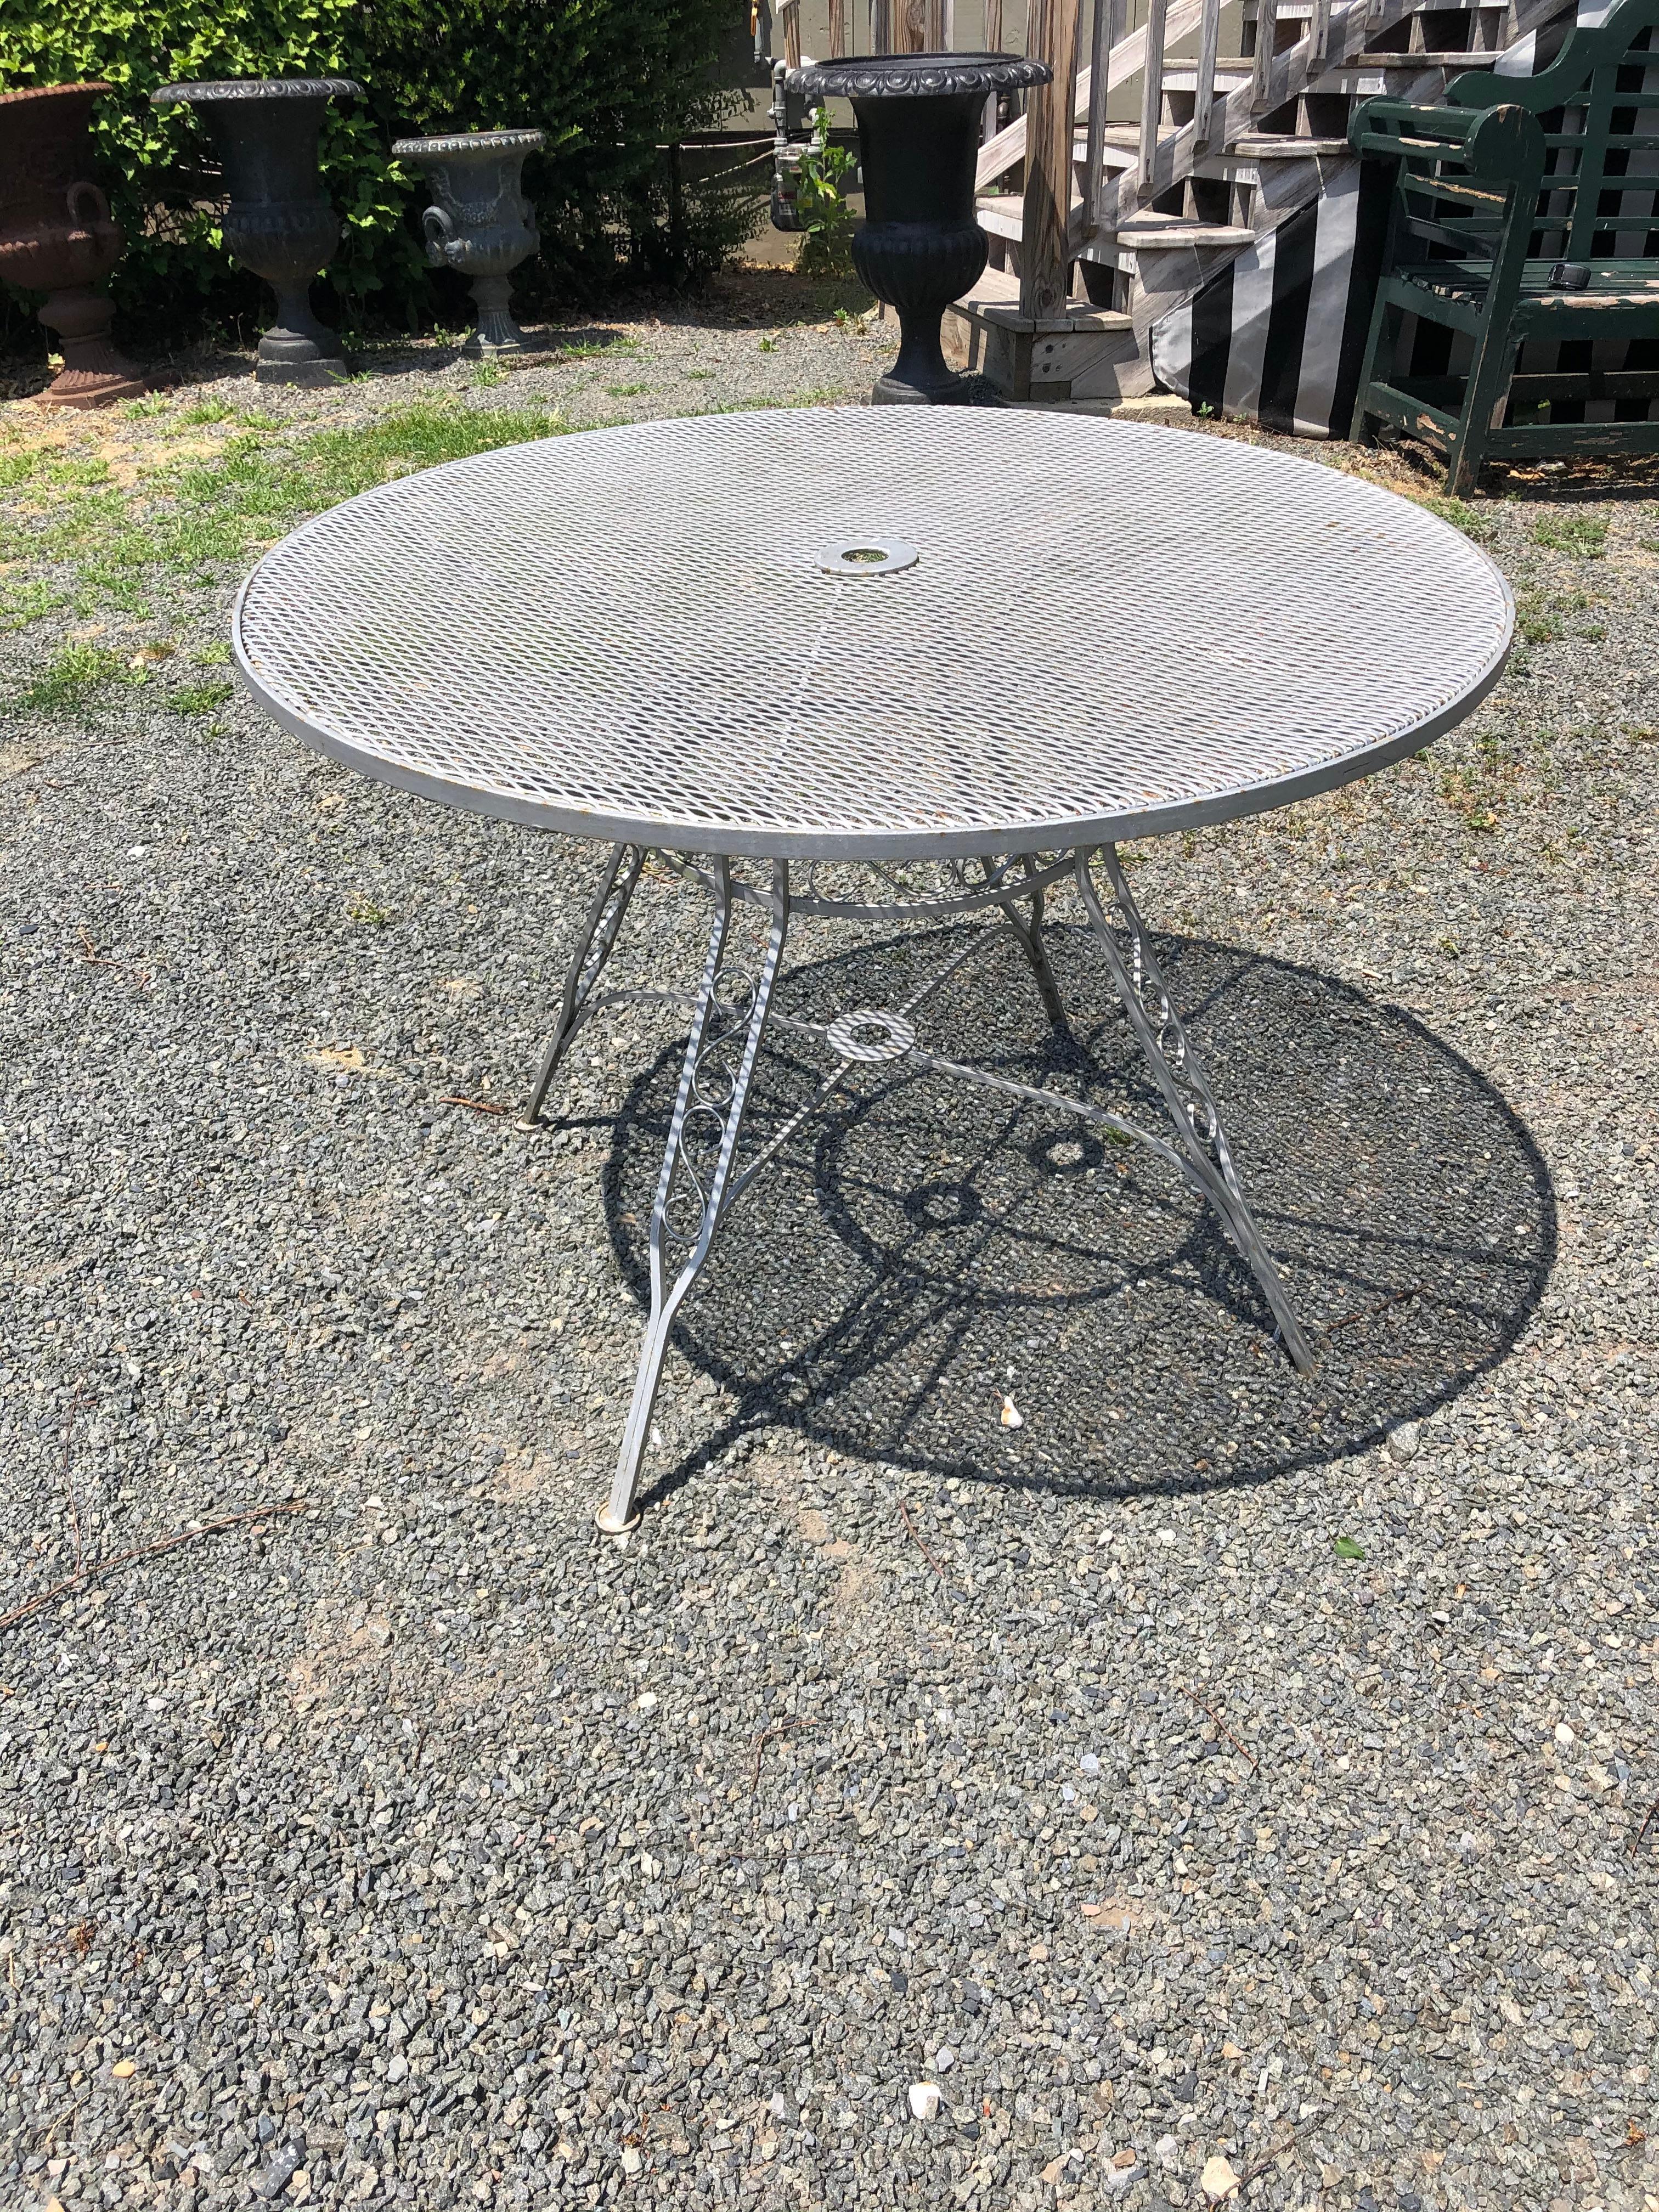 Vintage Woodard Midcentury Outdoor Dining Set with Round Table and 4 Chairs 1